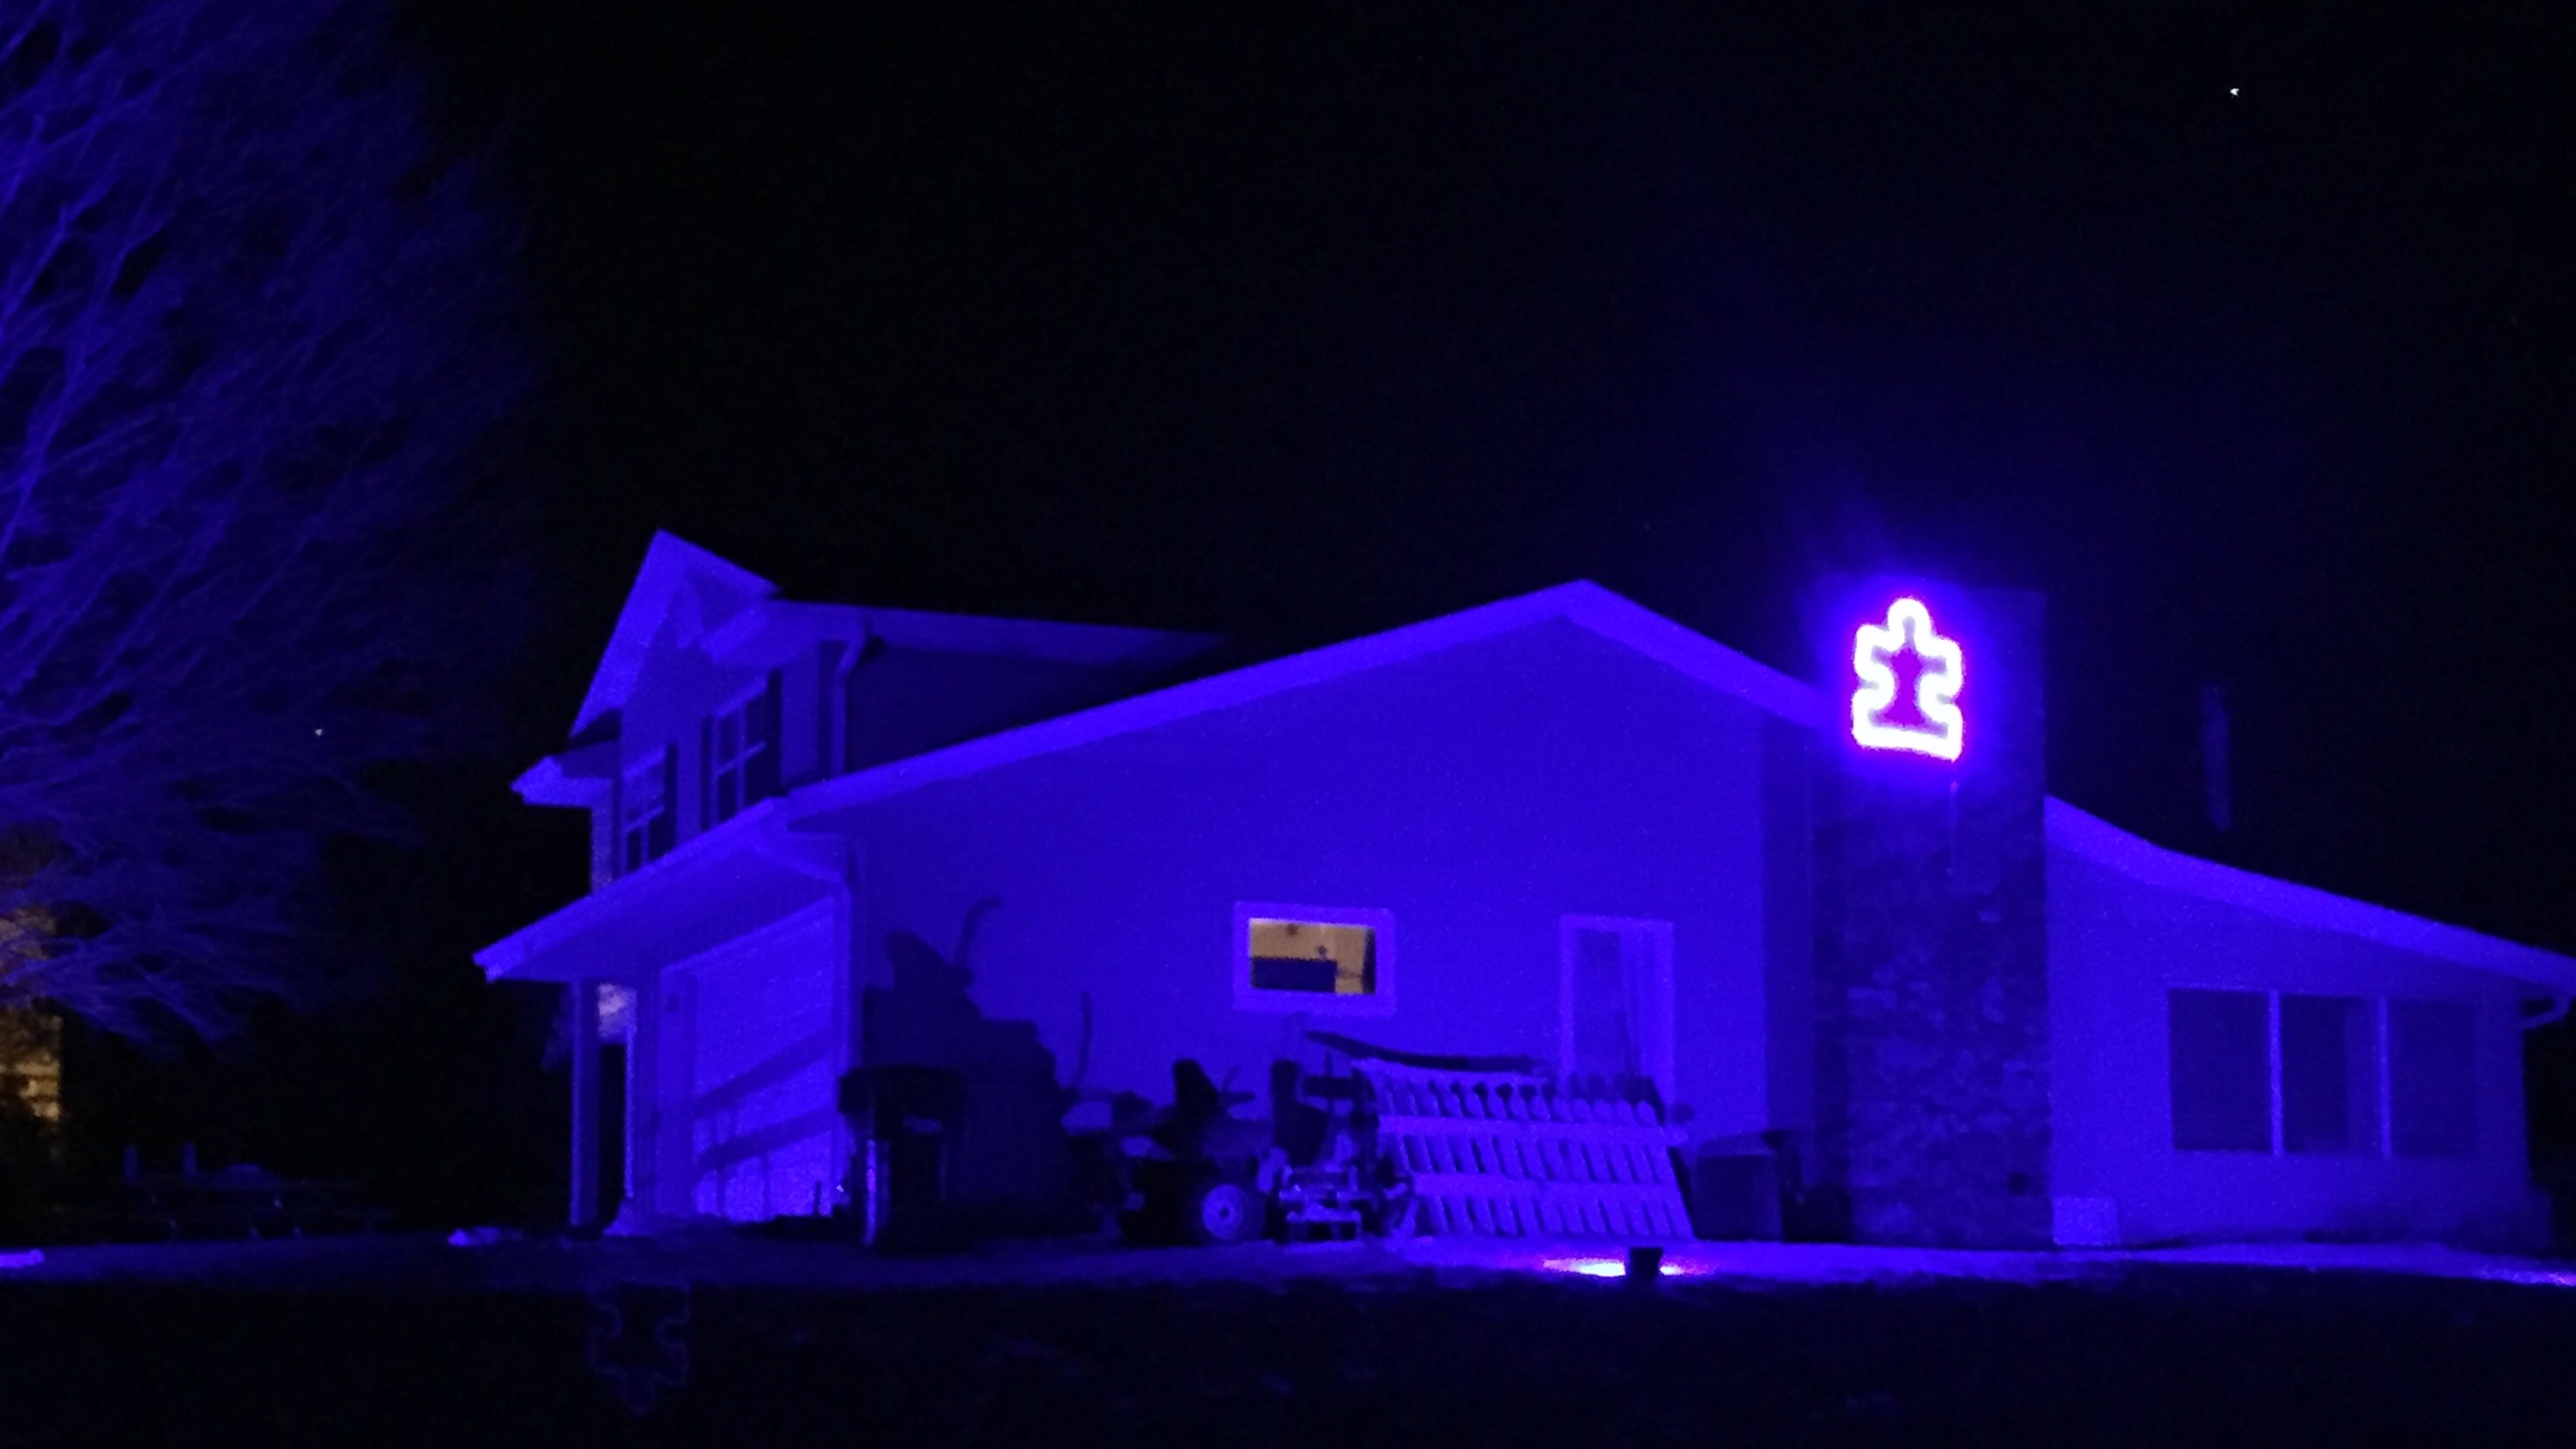 Quin's house for LIUB day with our custom made Autism Speaks sign